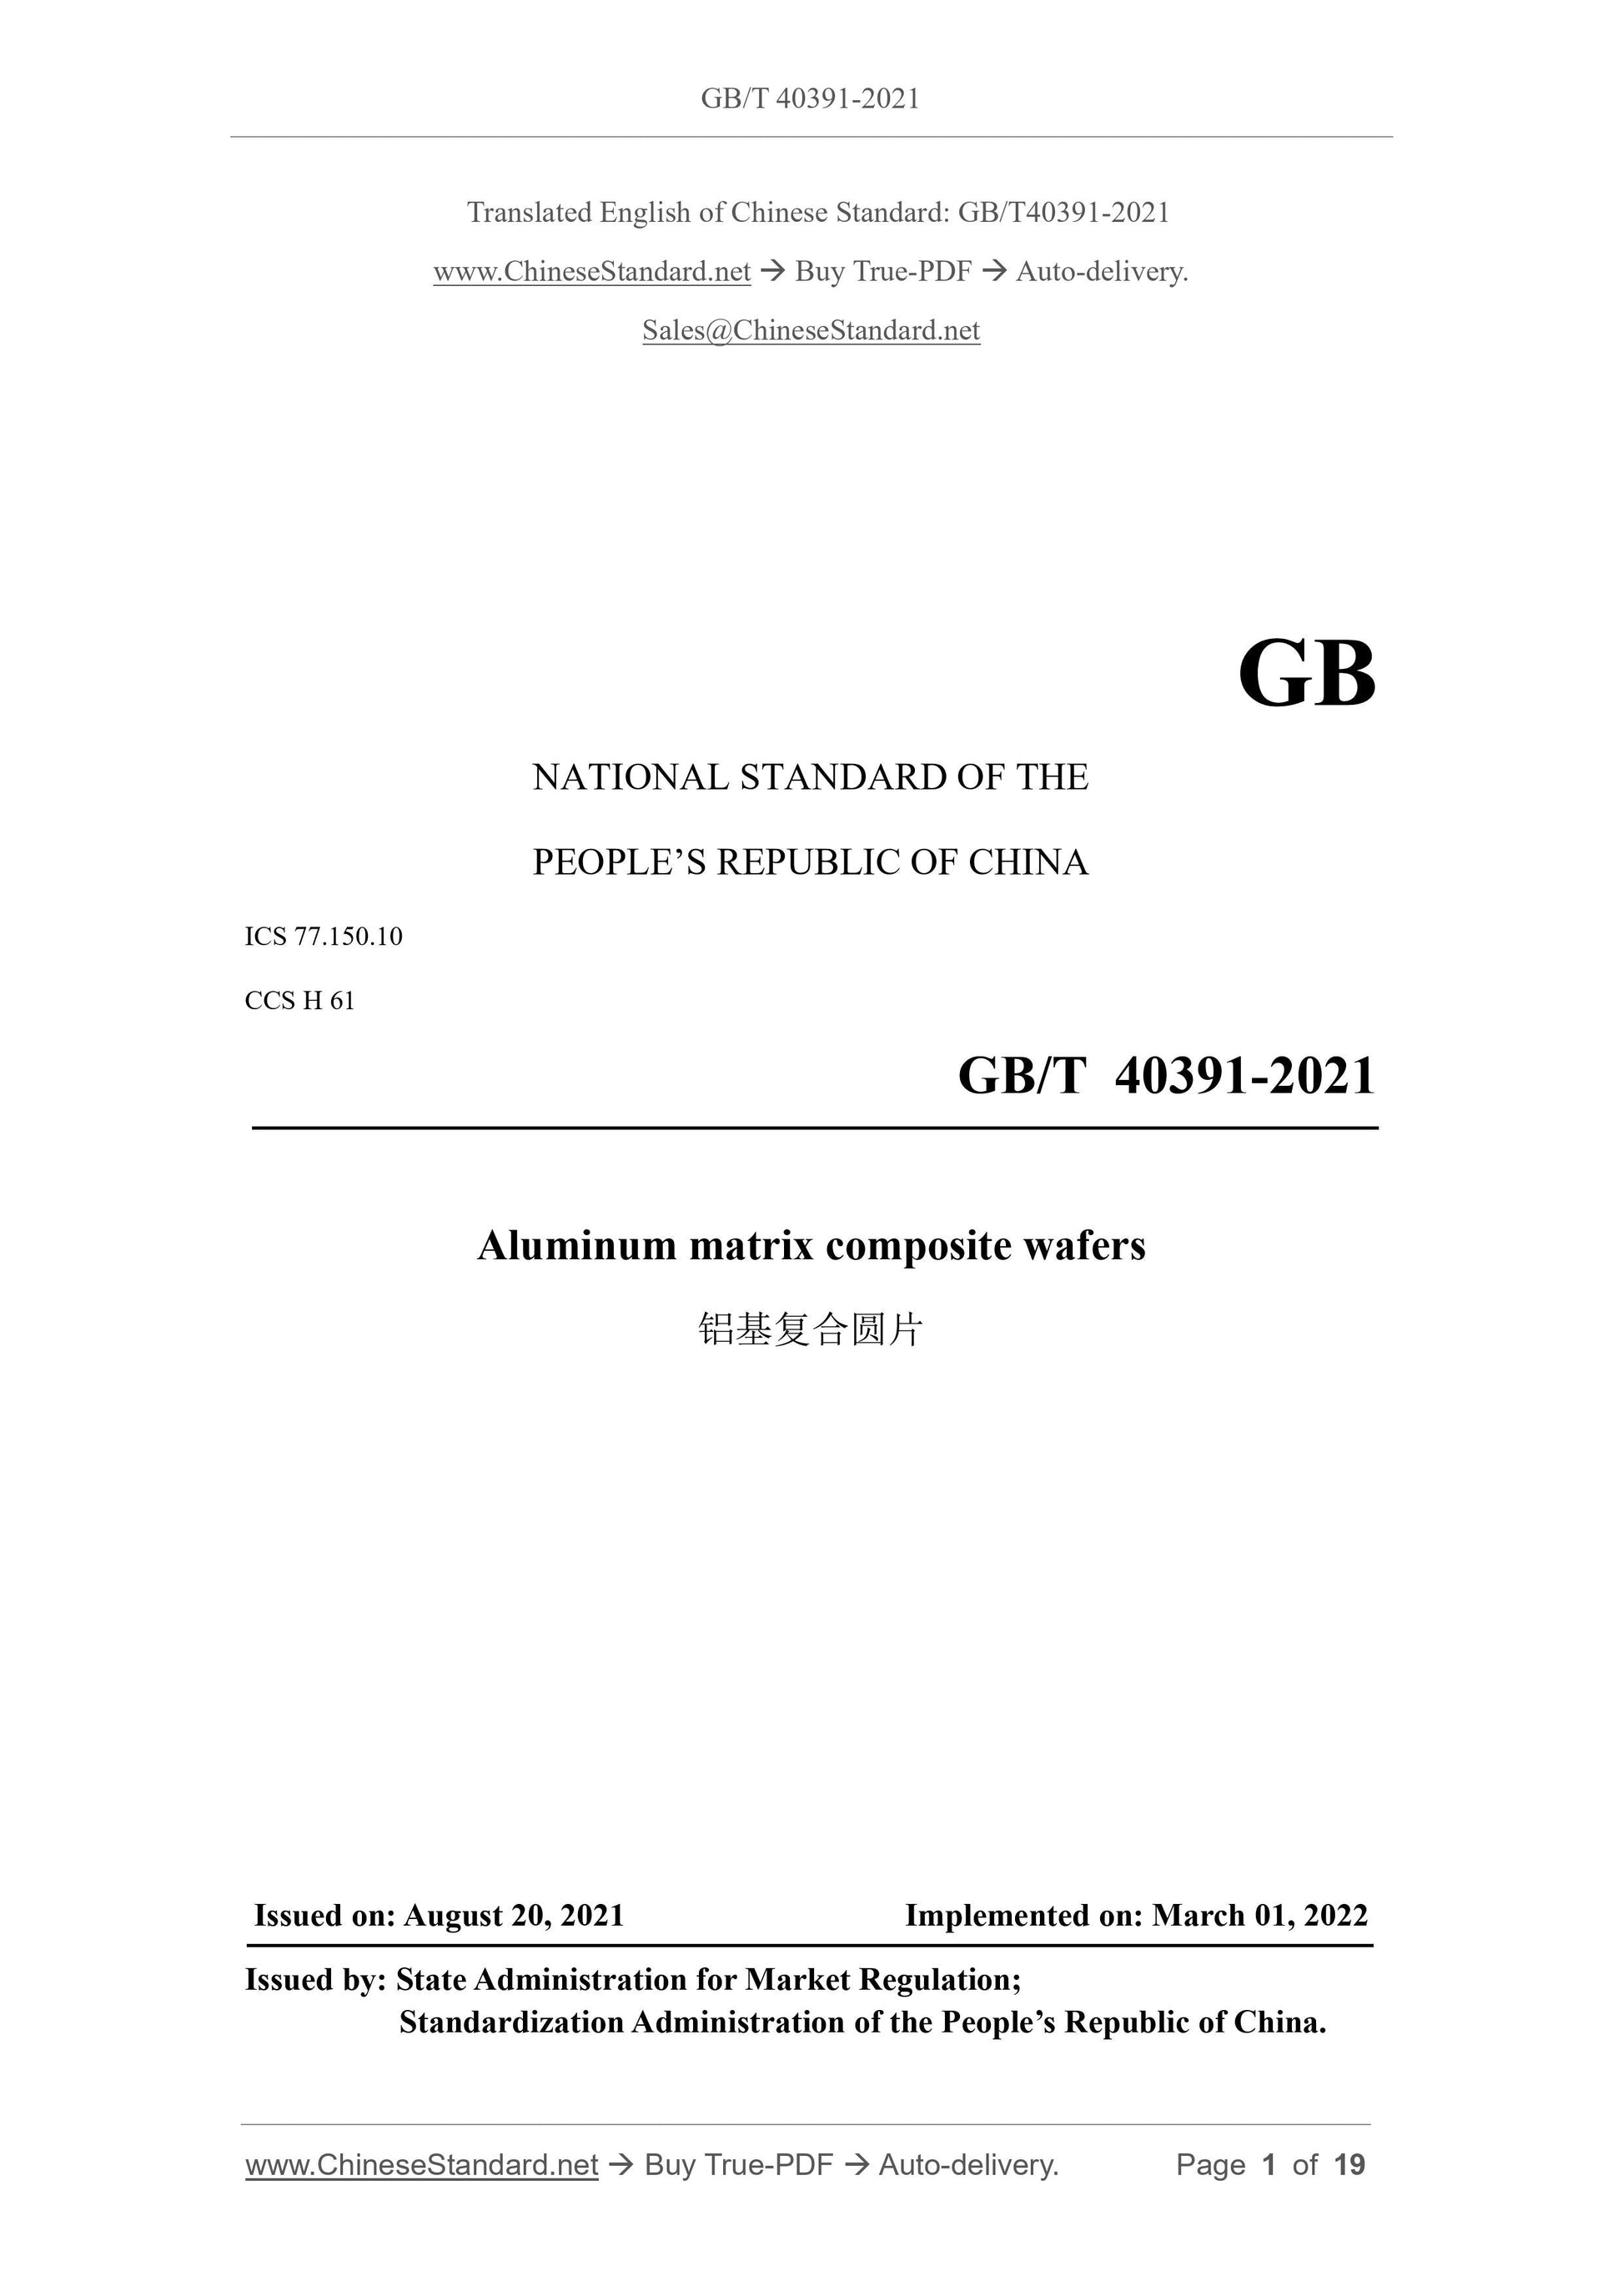 GB/T 40391-2021 Page 1